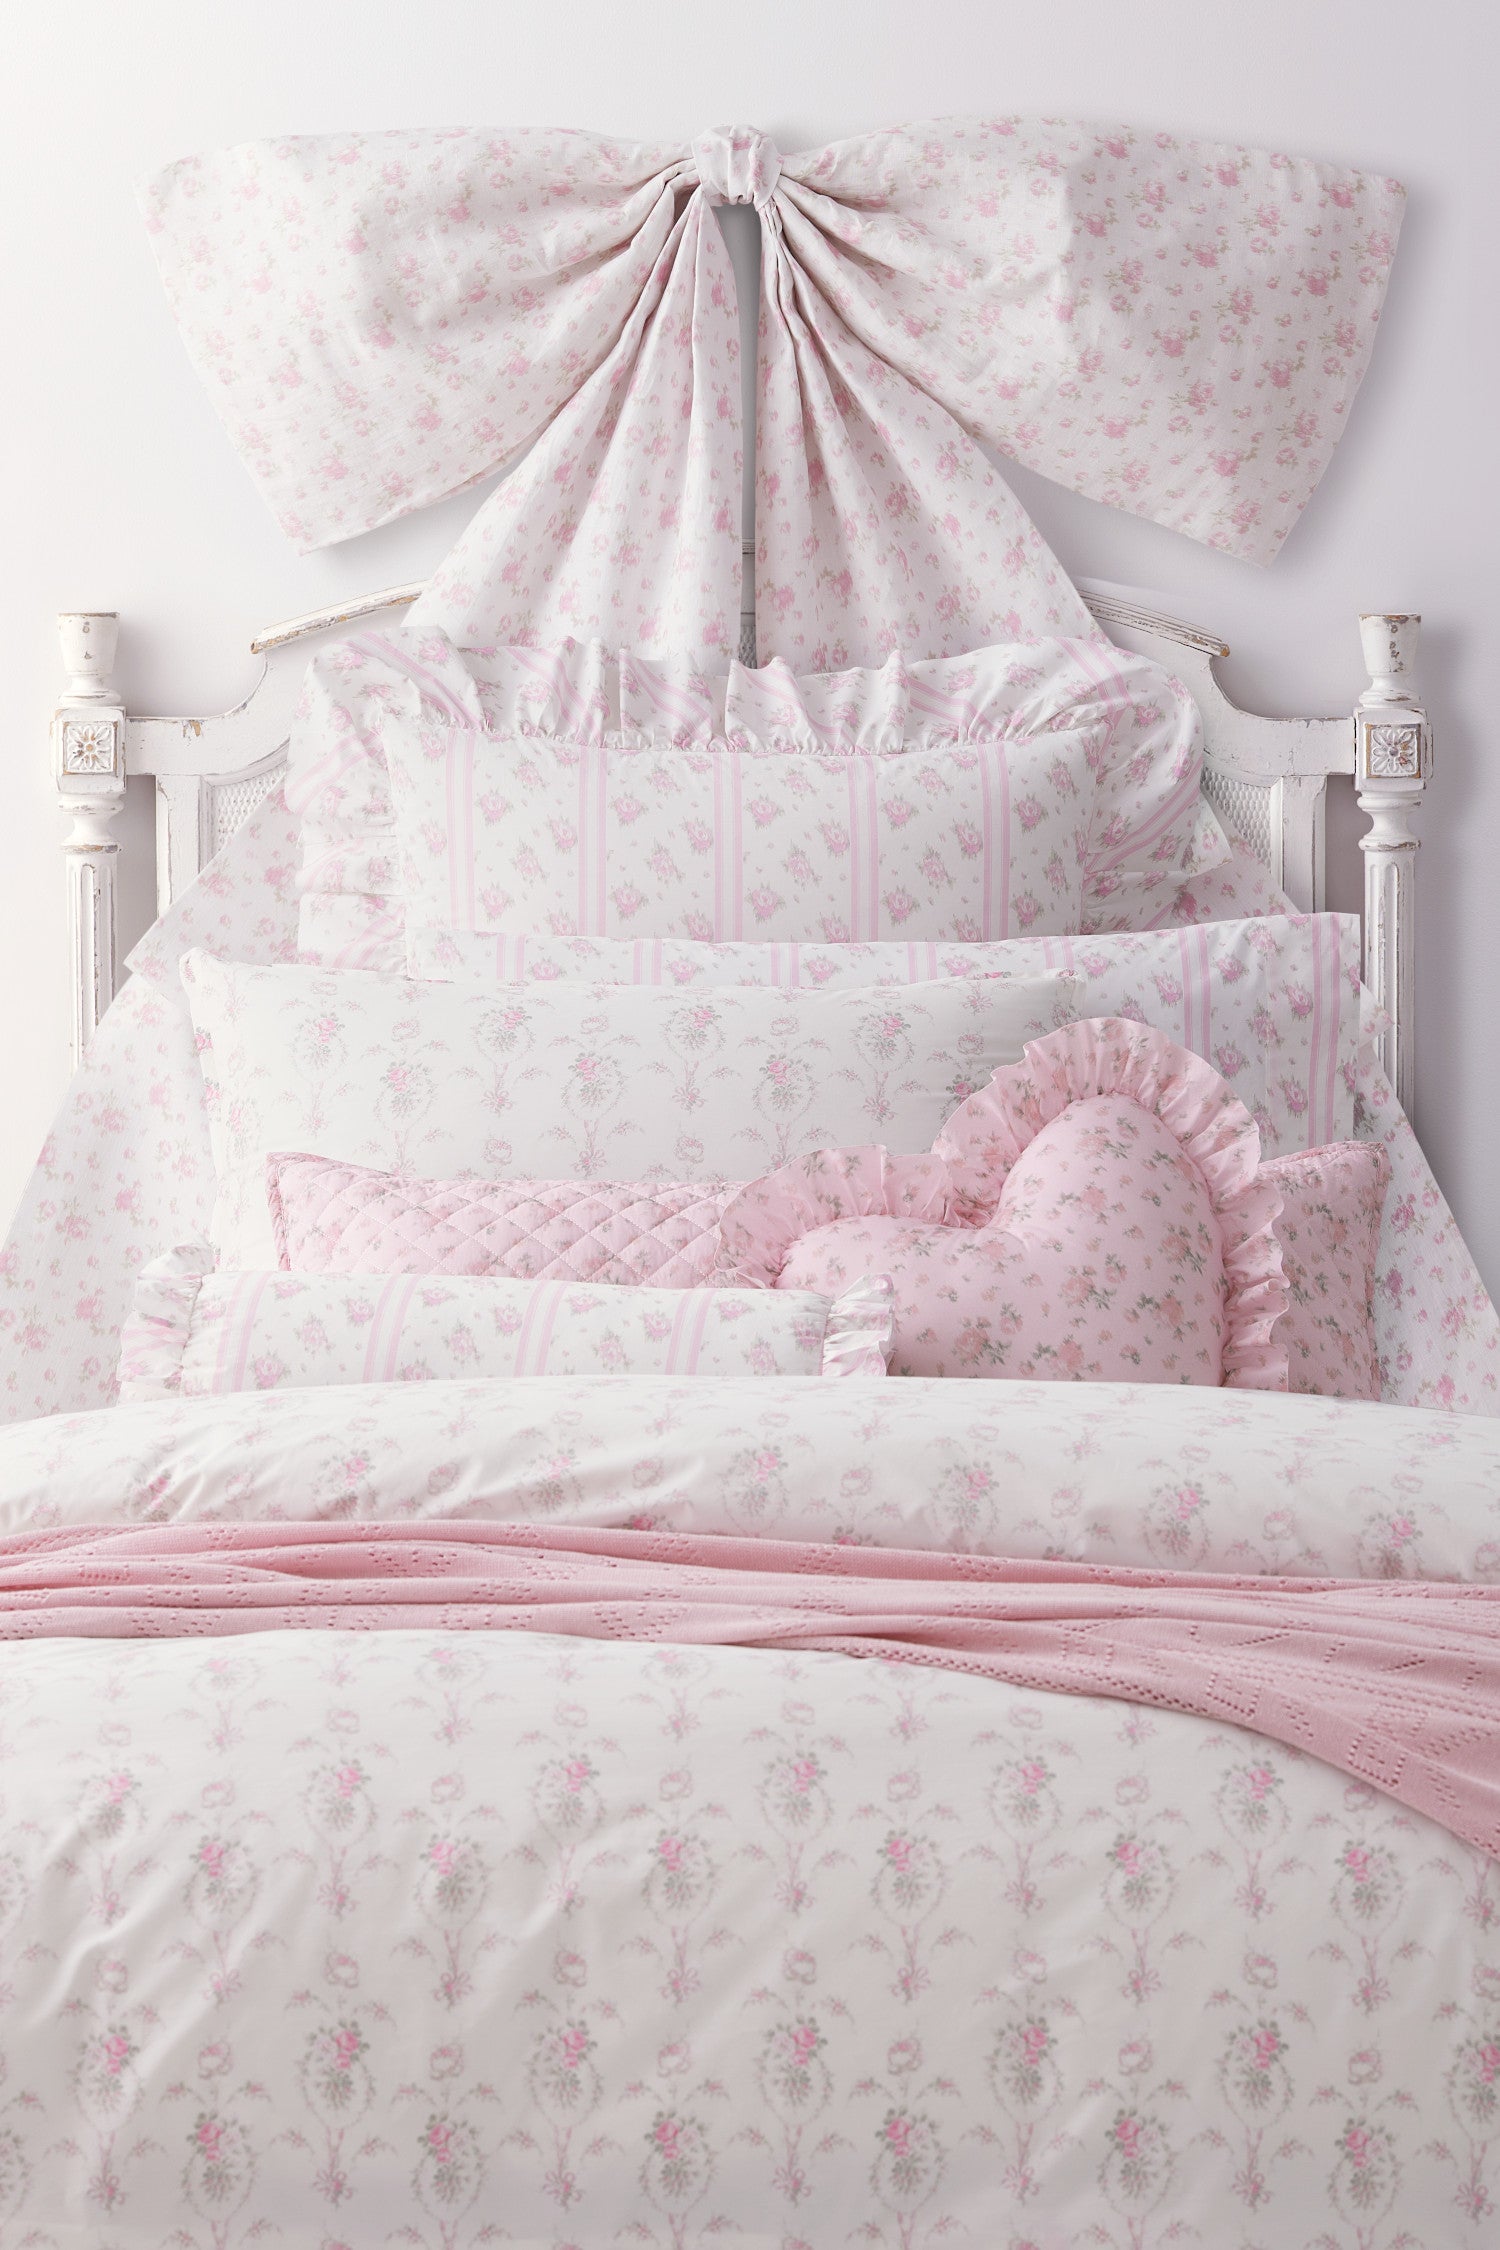 Introducing our lightweight and airy sheets in a beautiful floral pink design. Crafted from 100% cotton, these sheets offer the perfect combination of comfort and breathability.